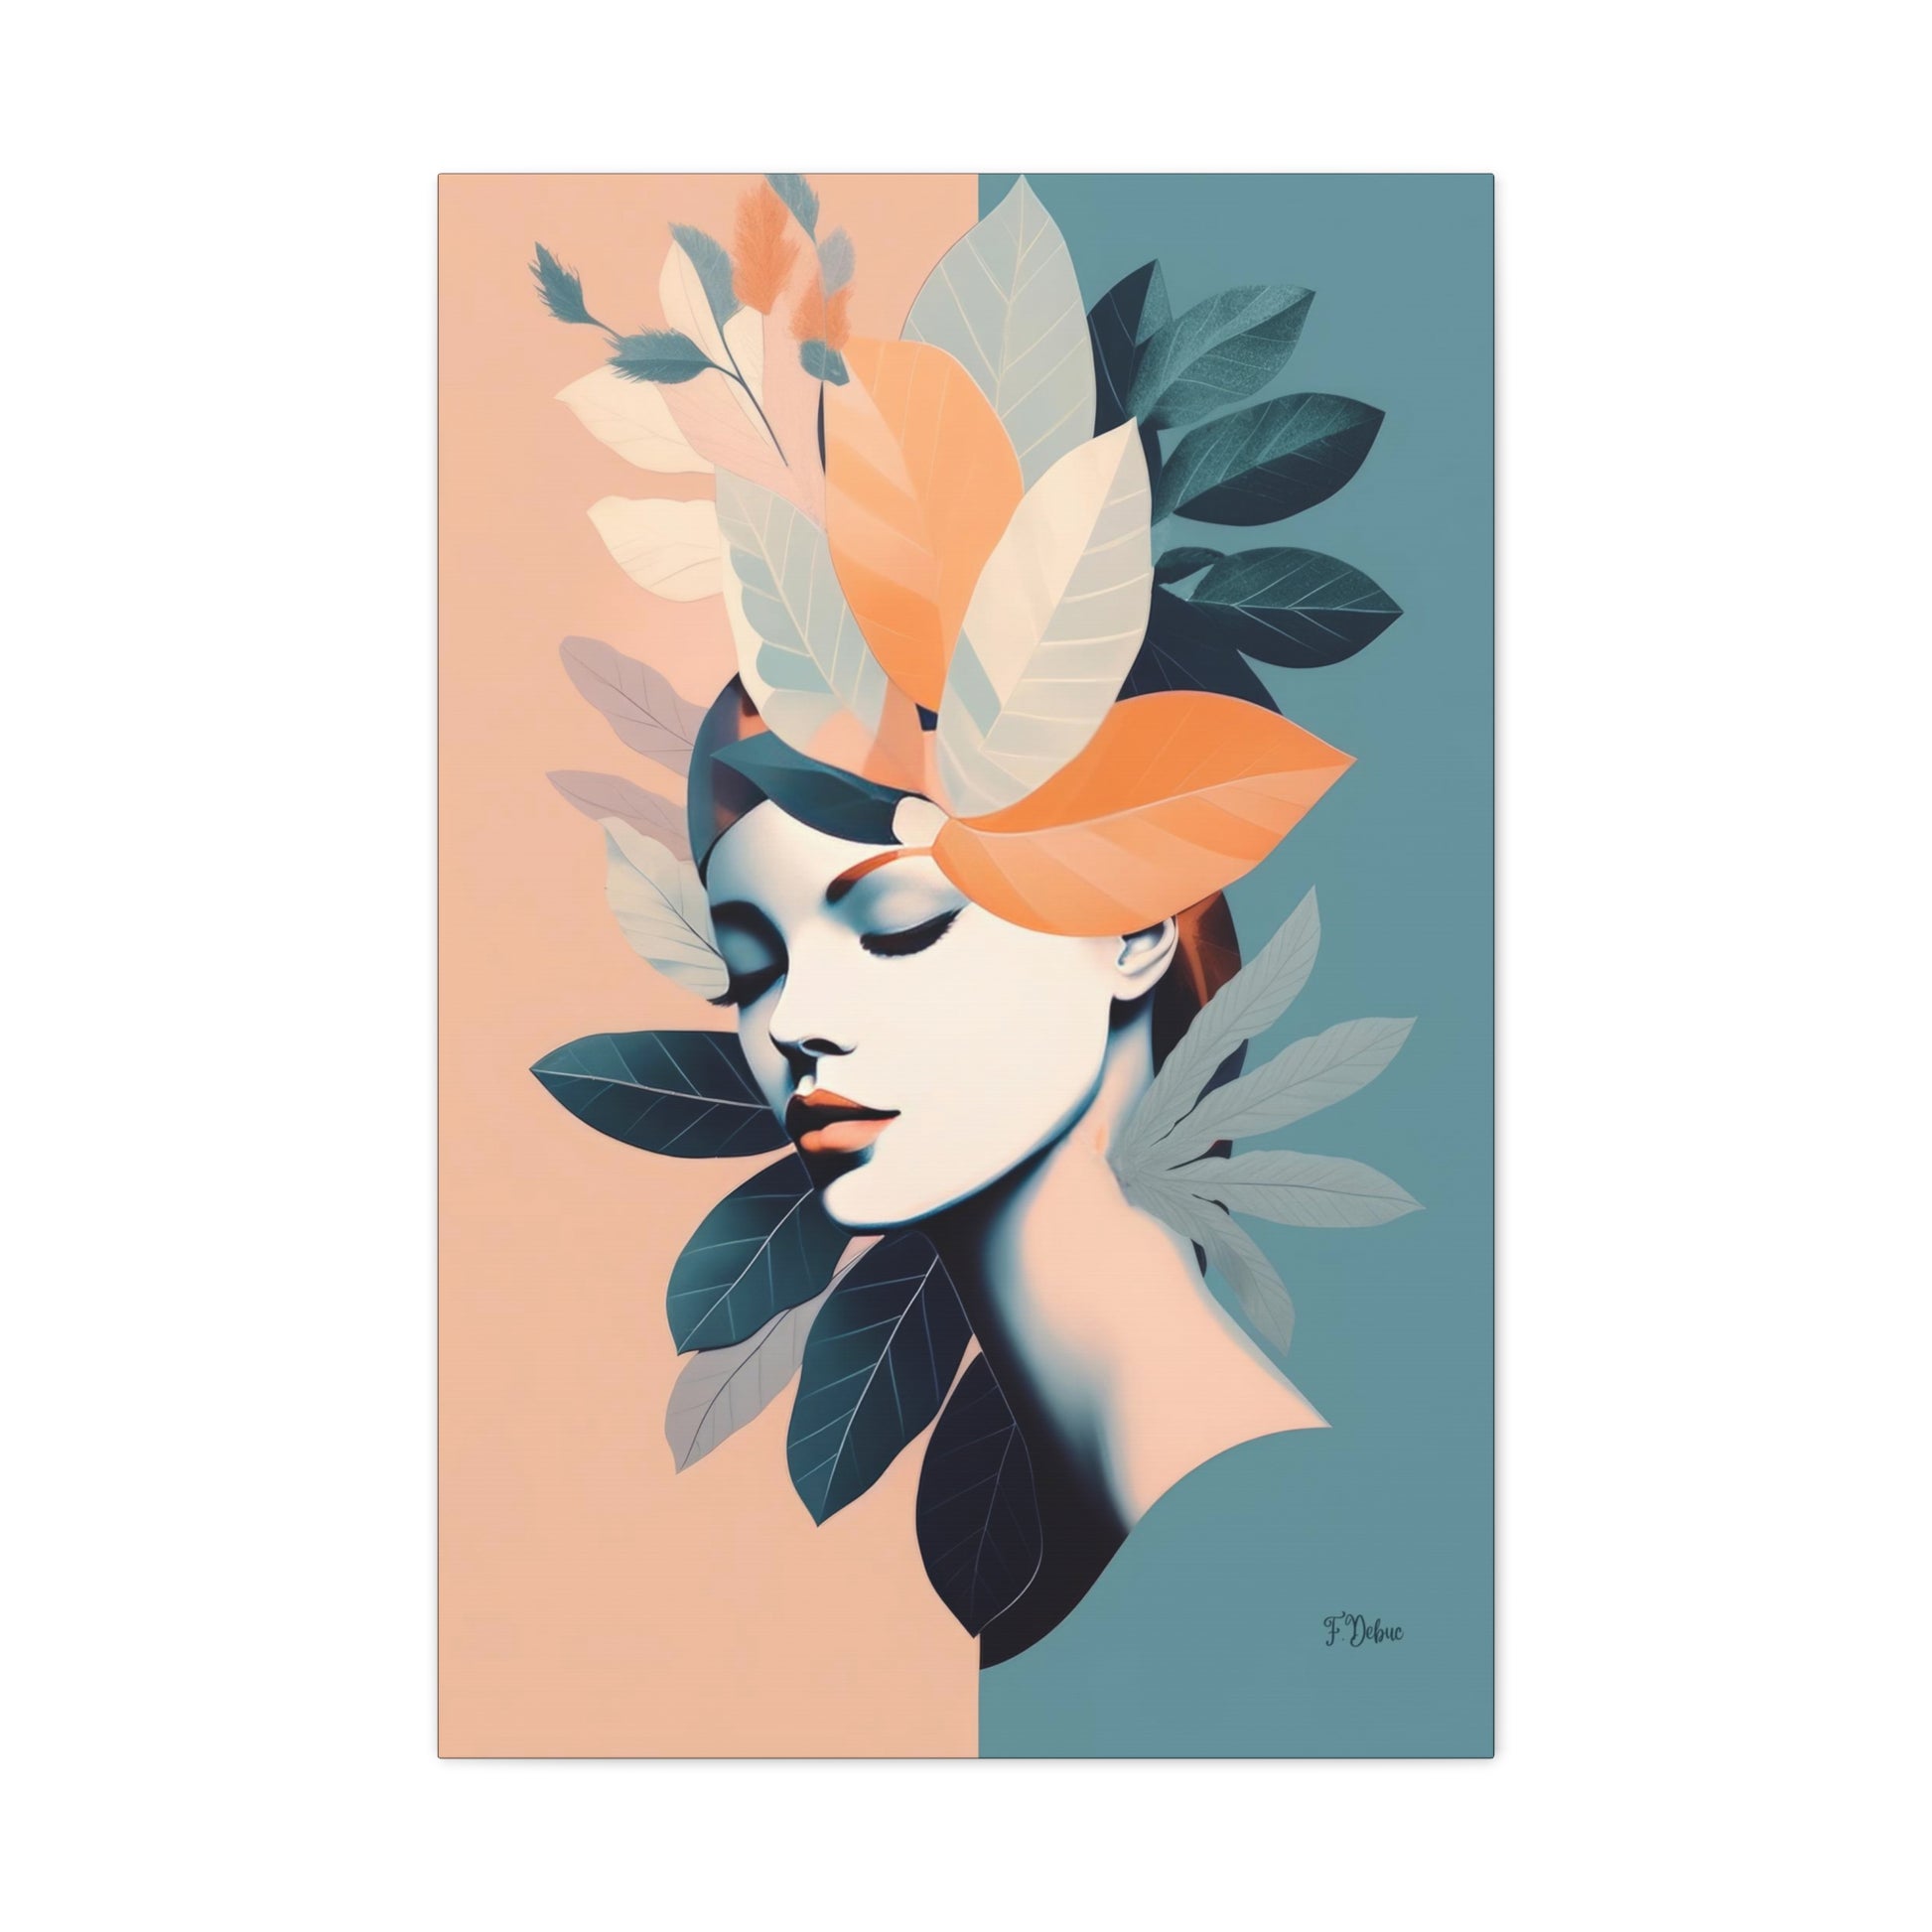 This a painting of a woman adorned with unique leaves on premium fine art paper, an elegant way to decorate your home.